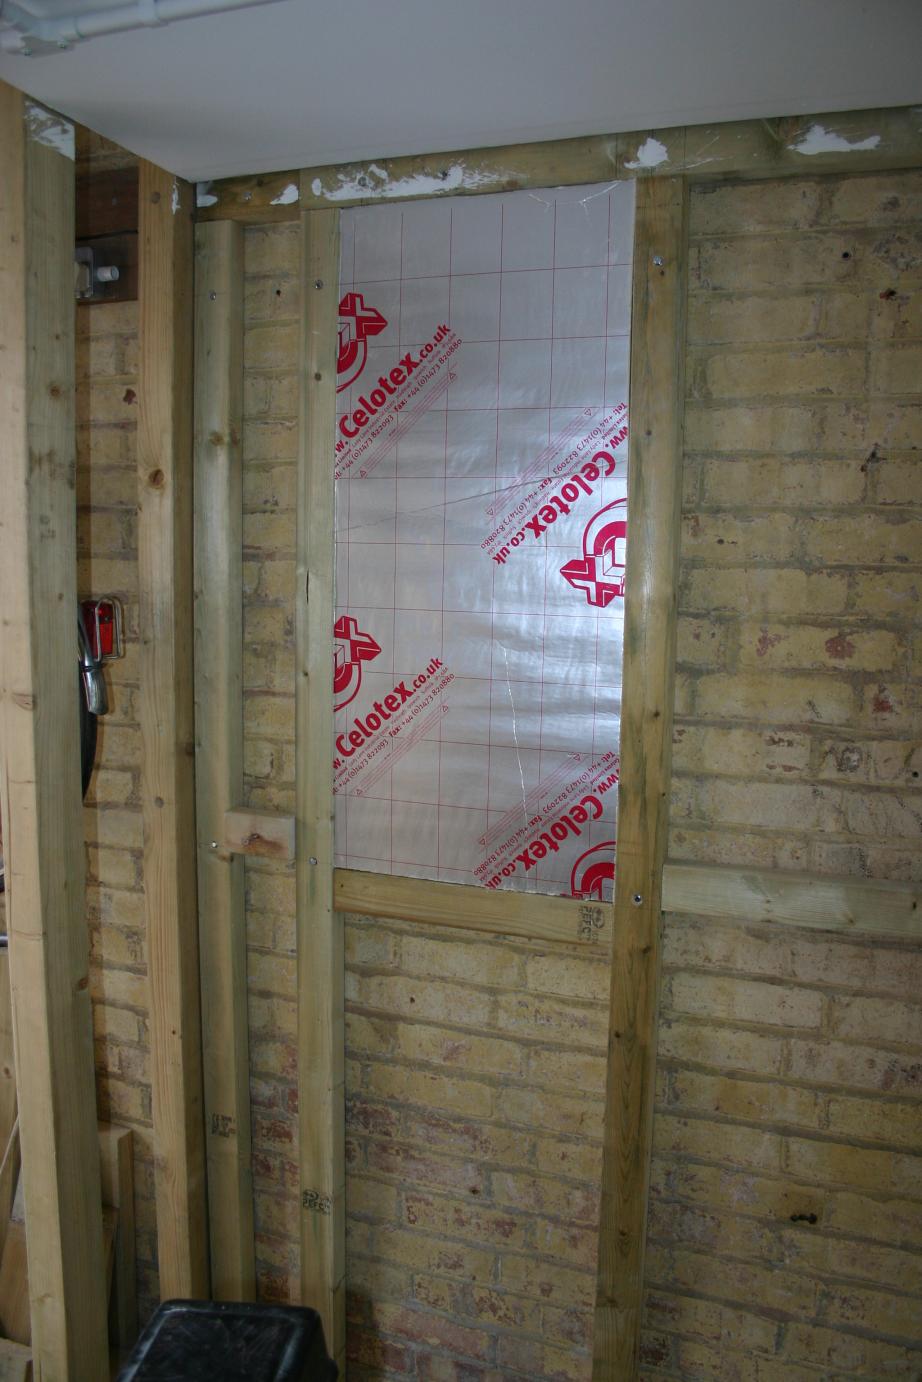 The first insulation board pressed into place, 30th August 2015.